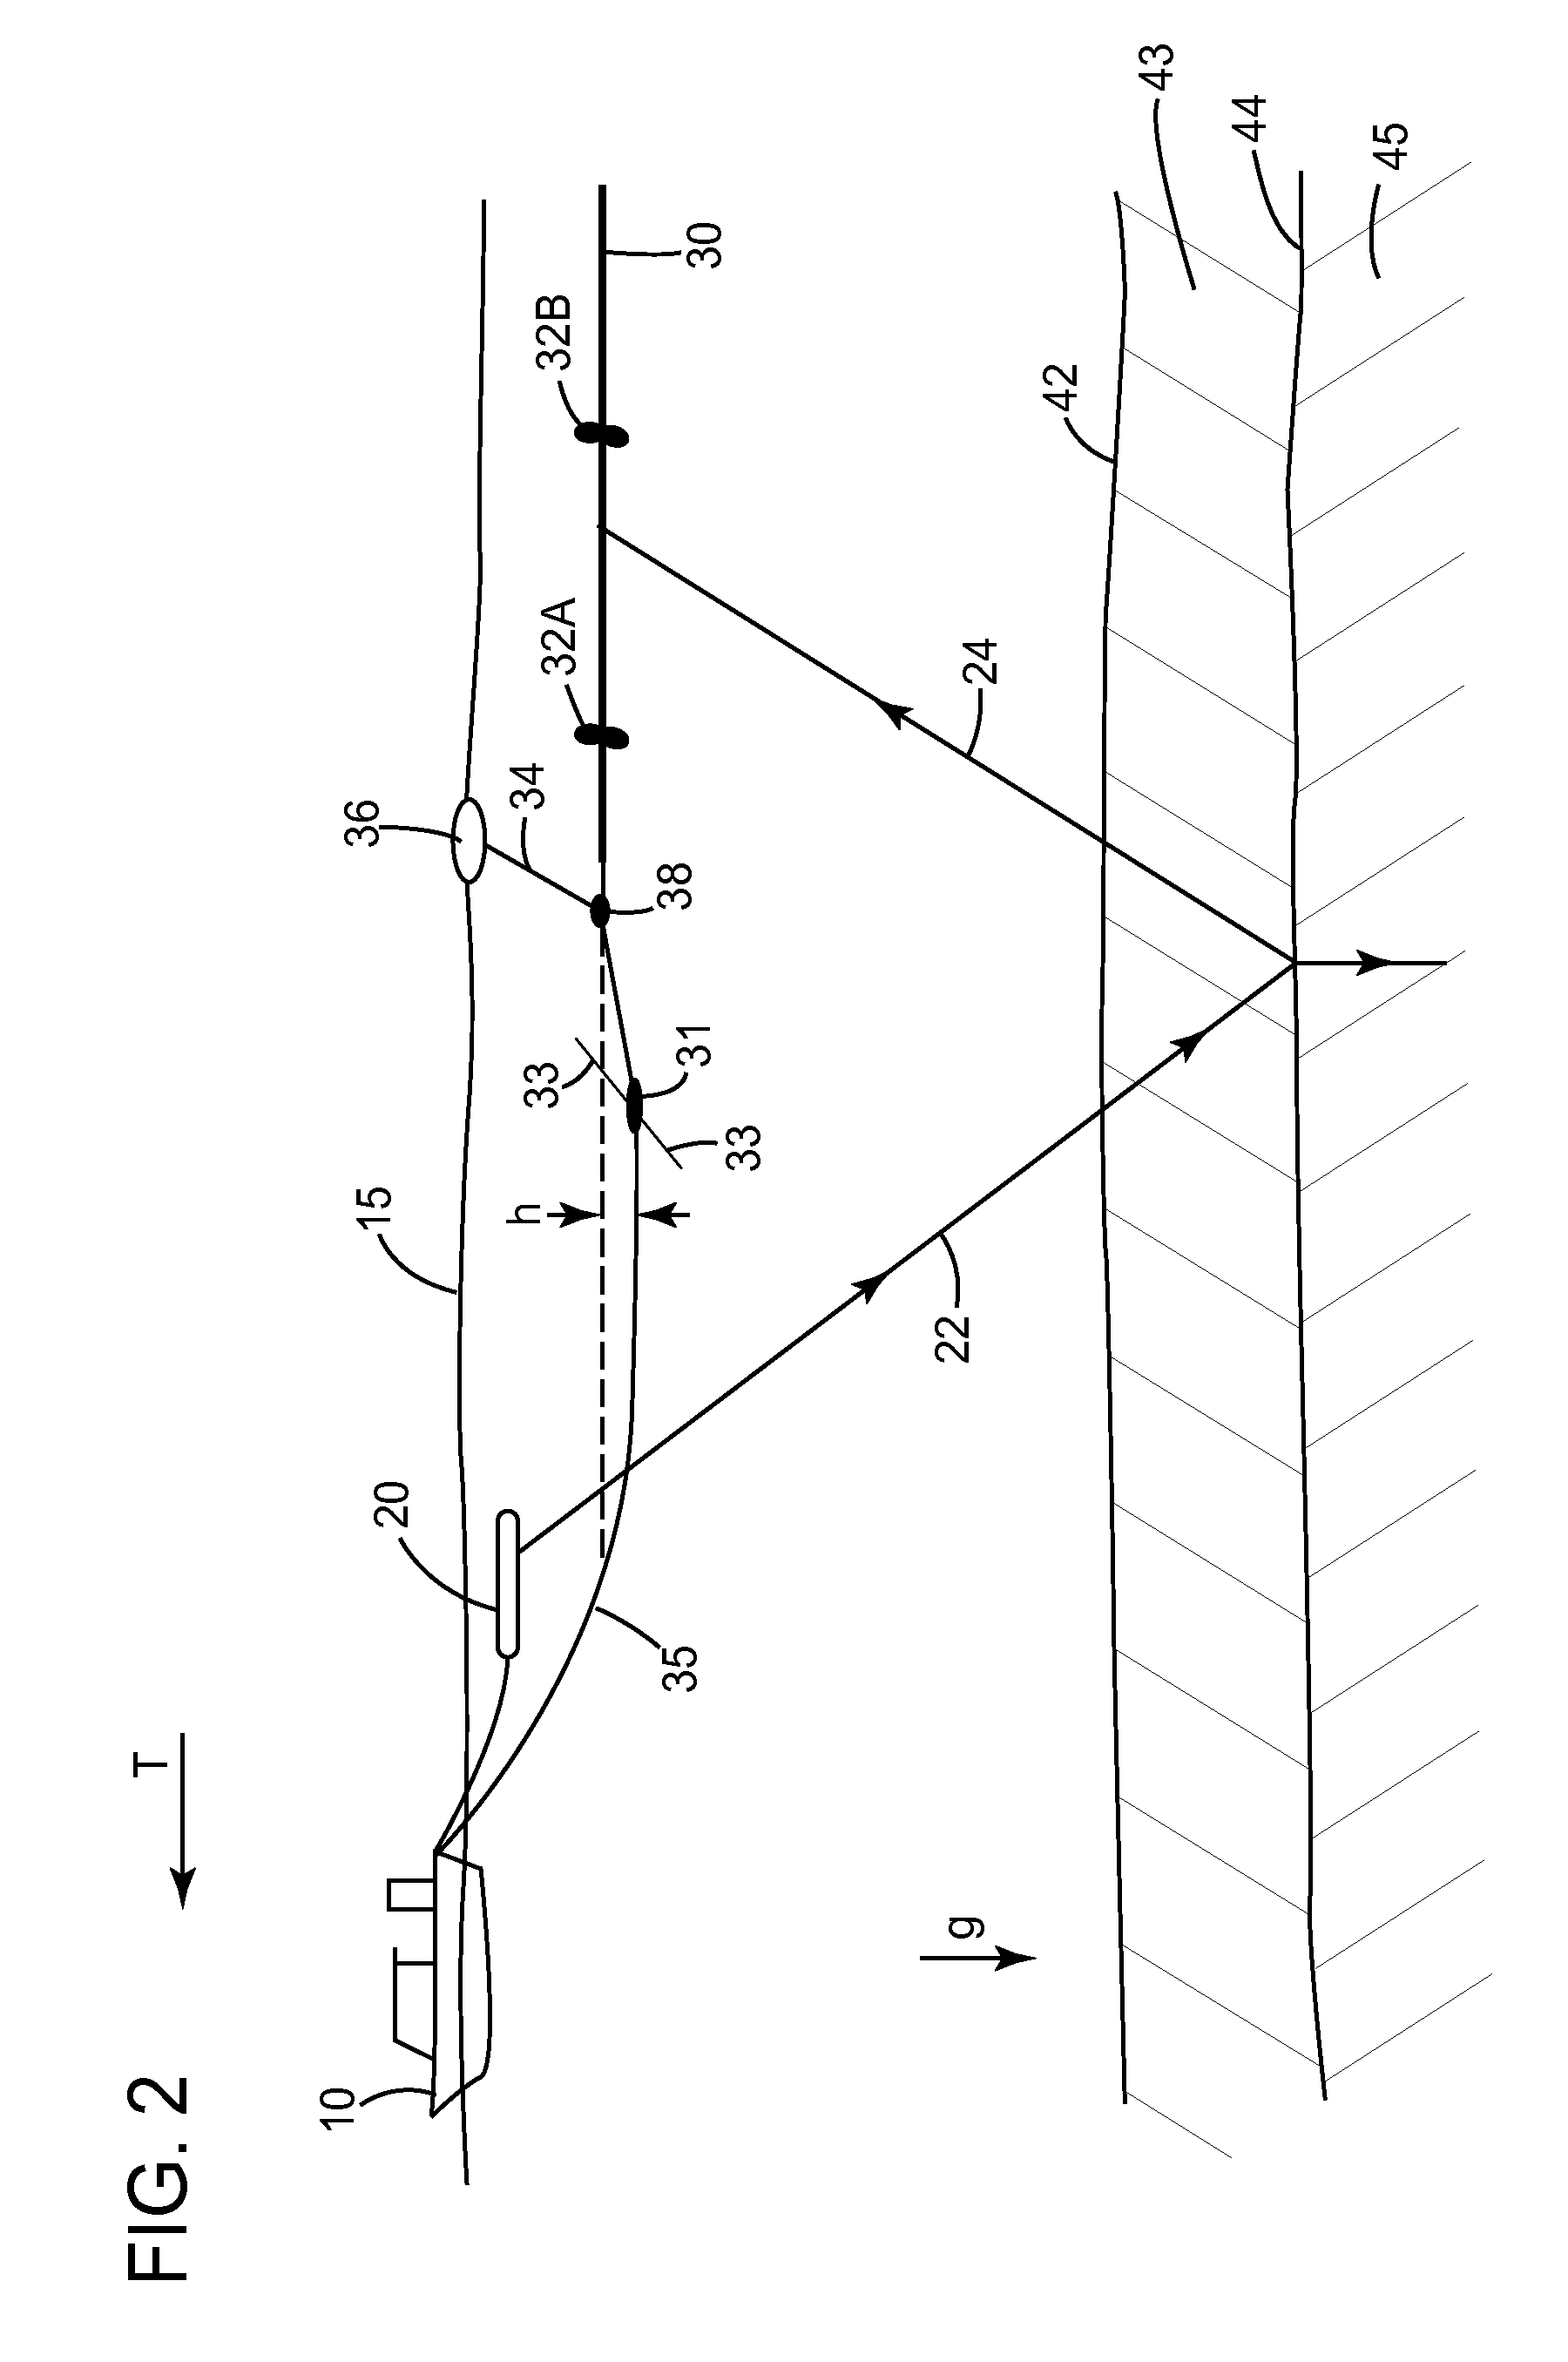 Lead-in cable with a replaceable portion and method